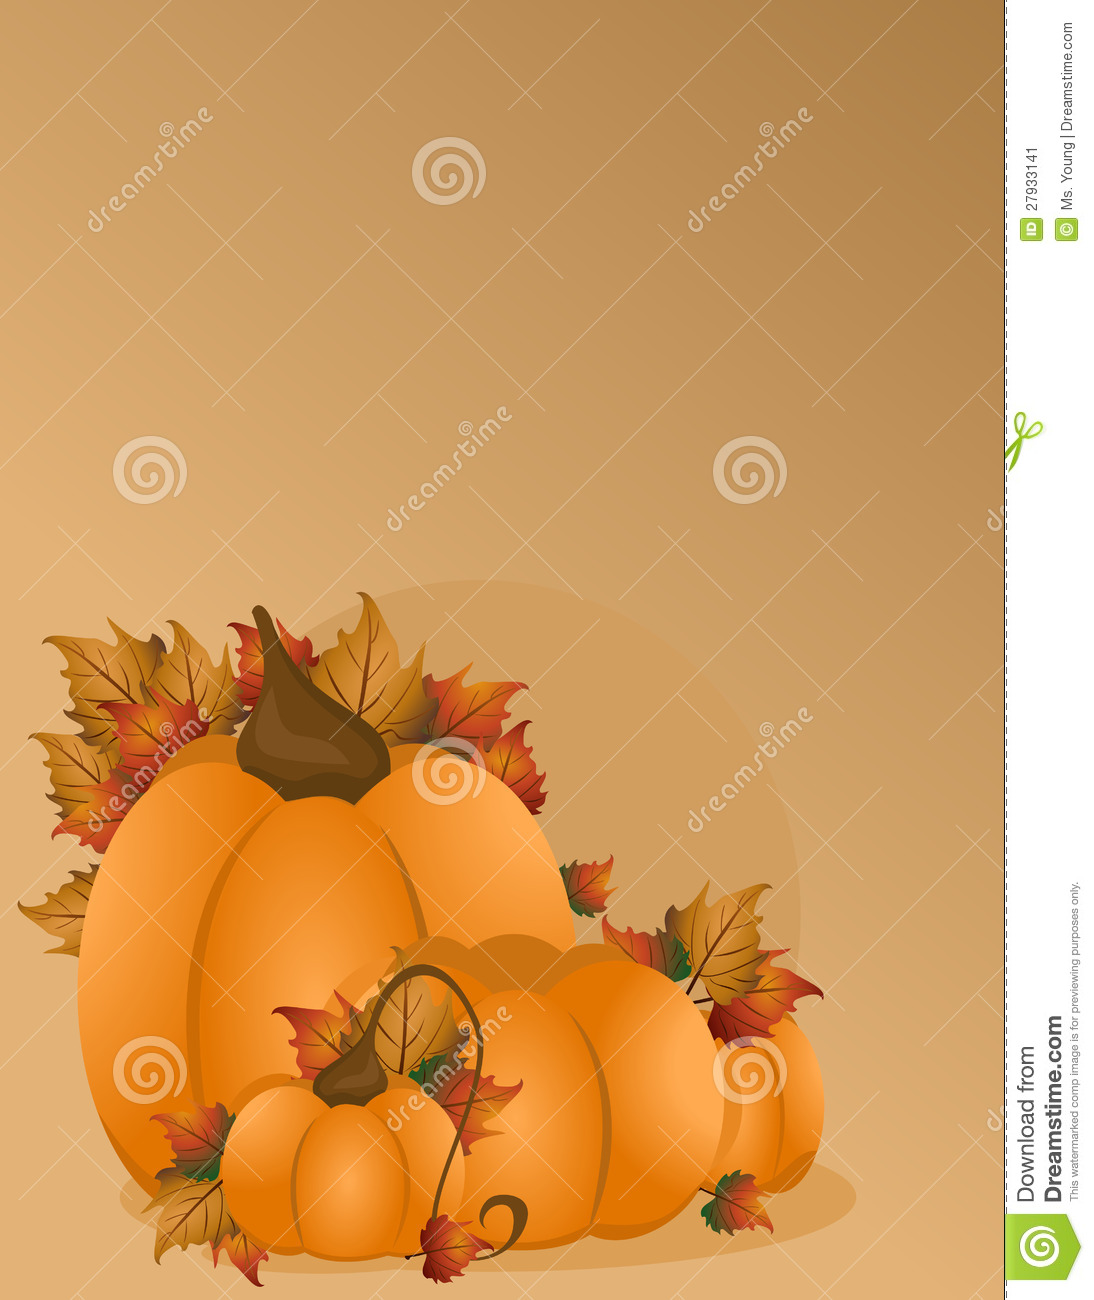 Illustration Of A Fall Background With Pumpkins